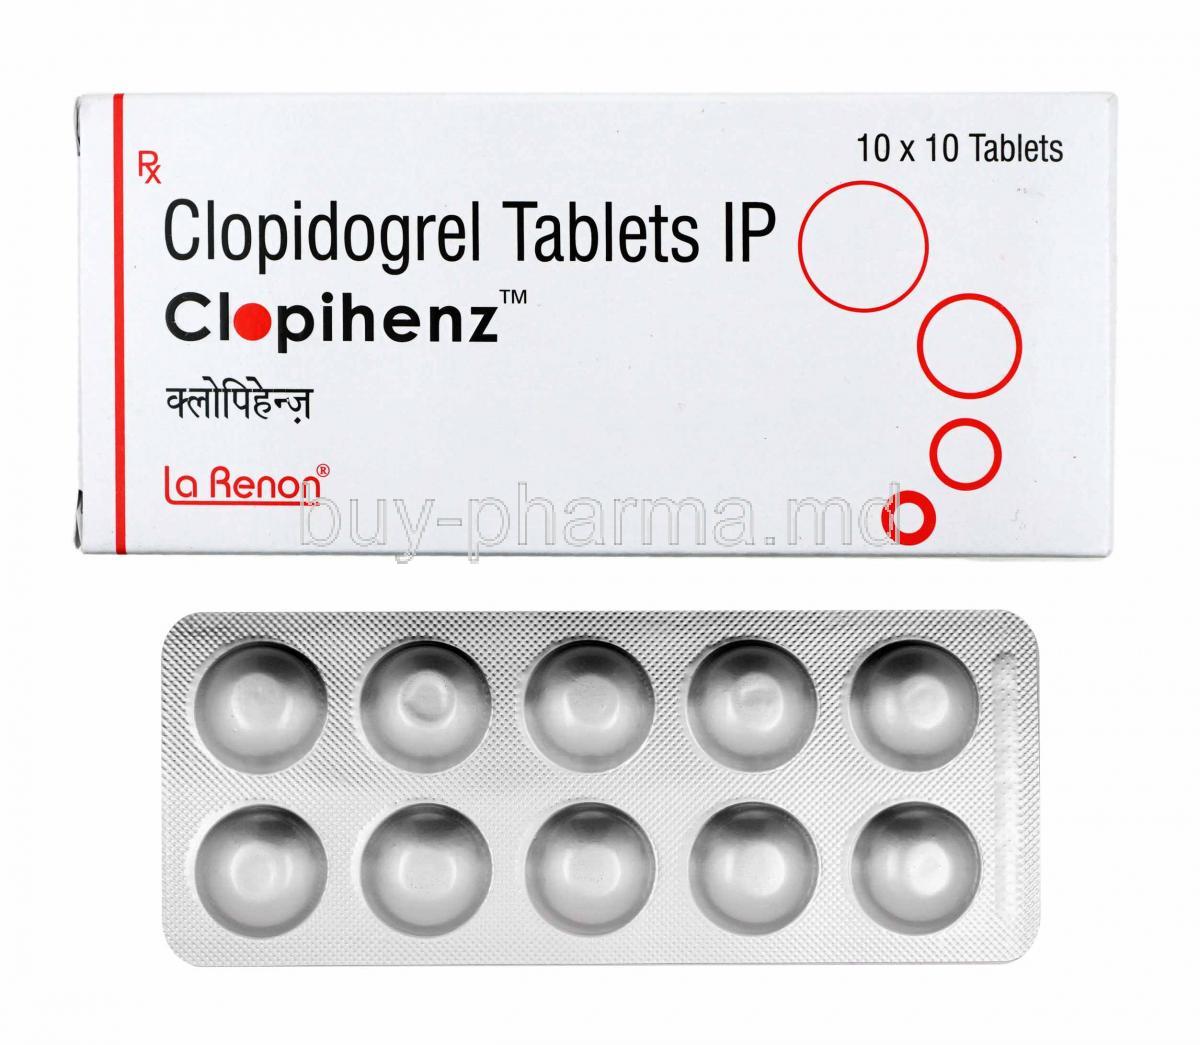 Colihenz, Clopidogrel box and tablets